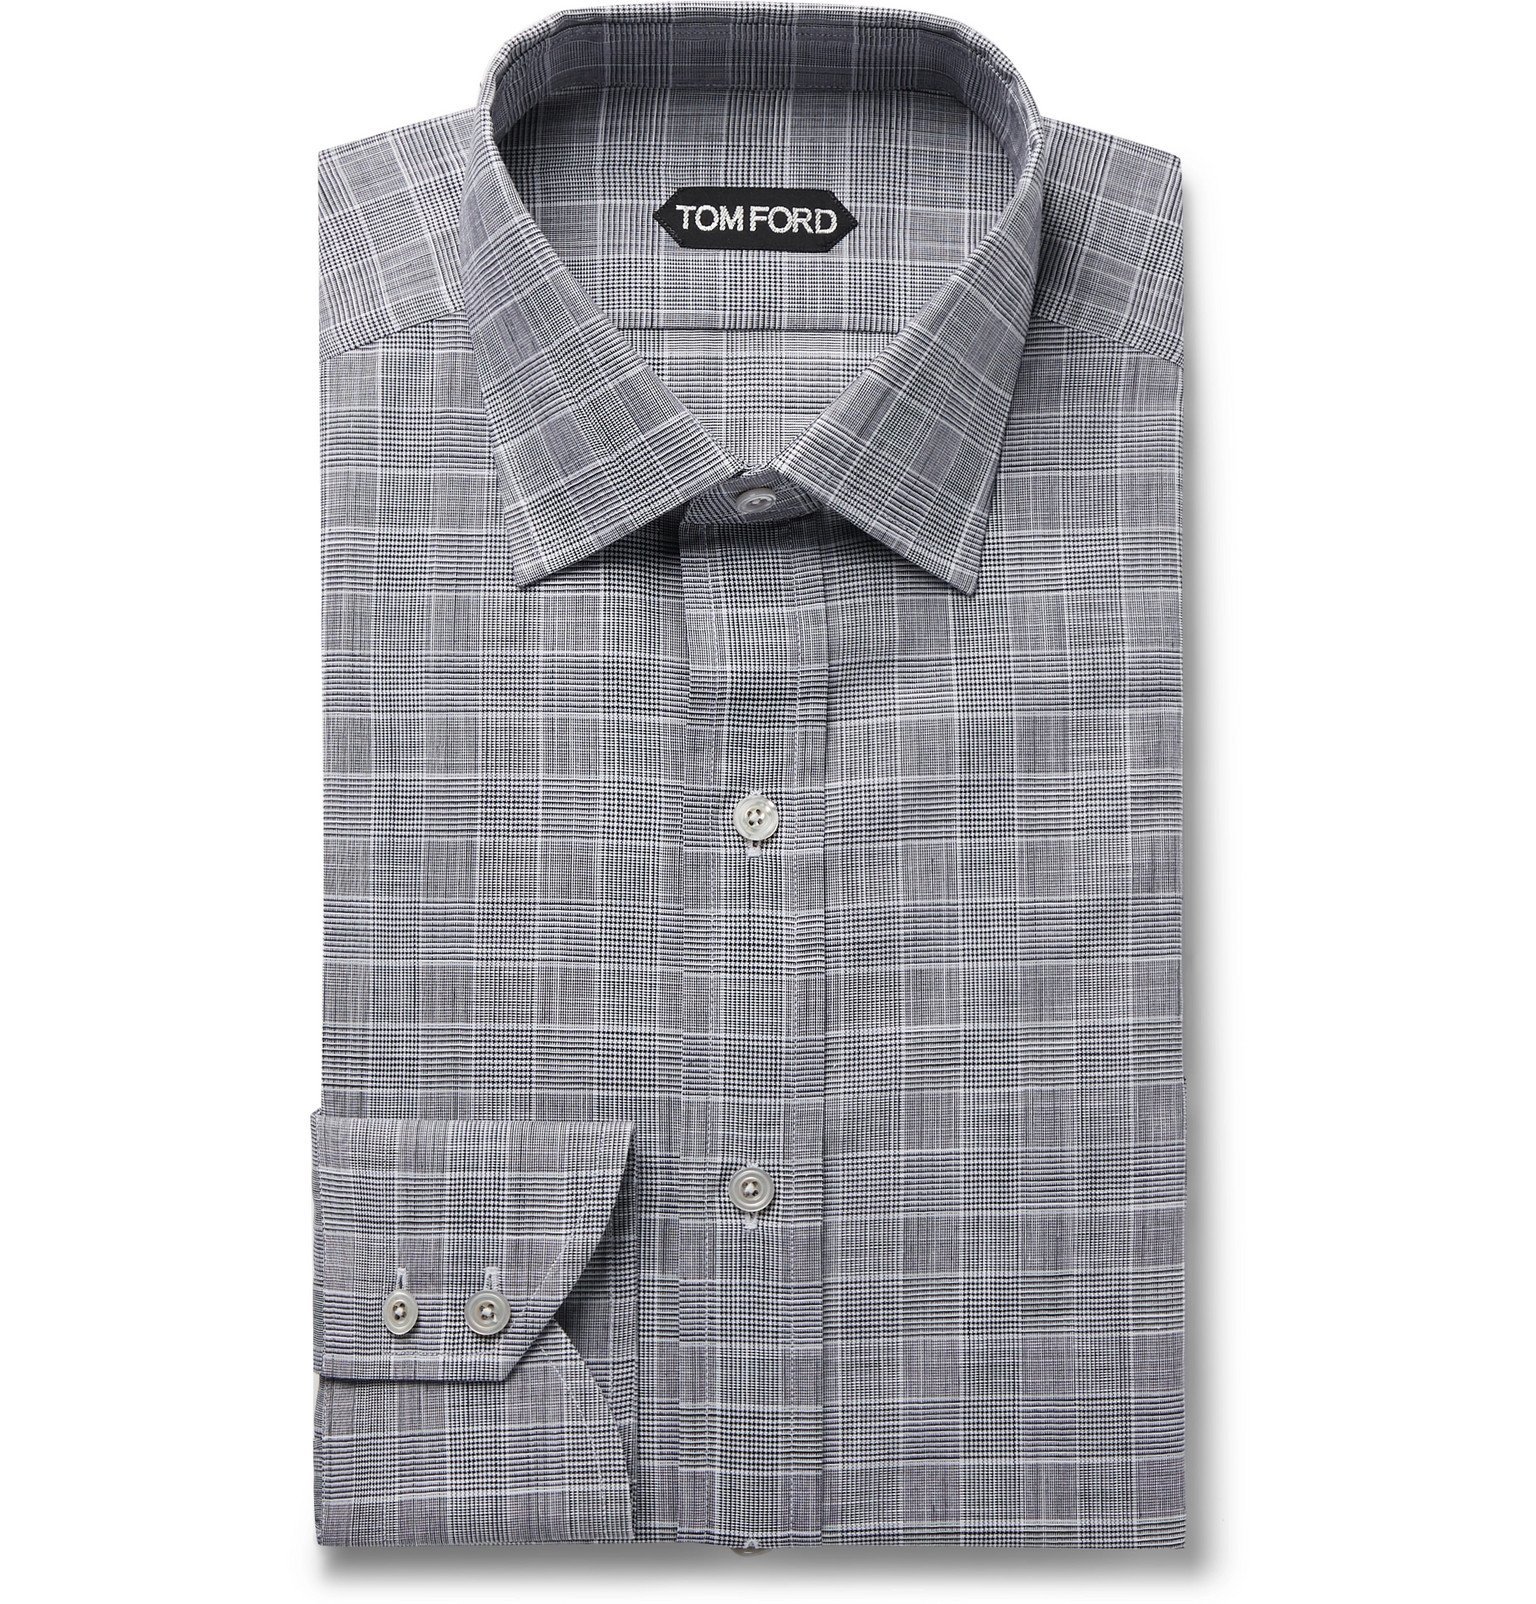 NWT $635 TOM FORD Gray-White Woven Check Cotton Dress Shirt 15.75 Classic-Fit